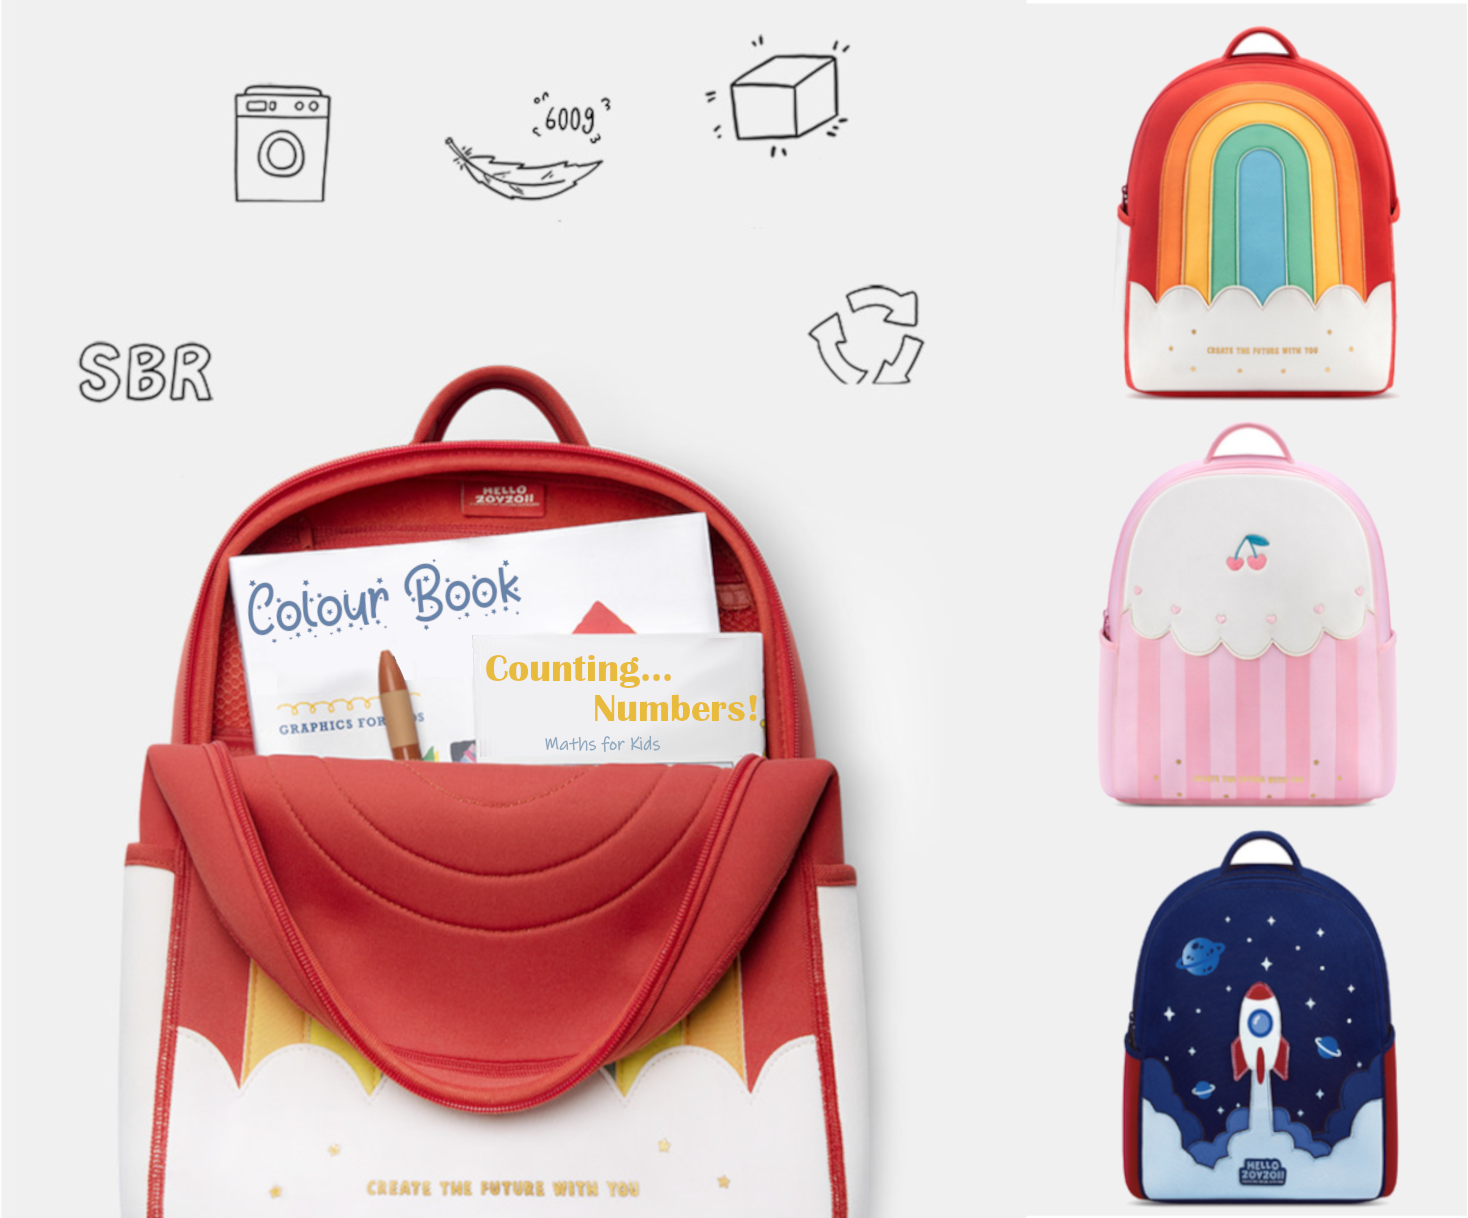 🌟 Upgrade Your Child's School Experience with the Spine Care Cute Schoolbag! 🎒